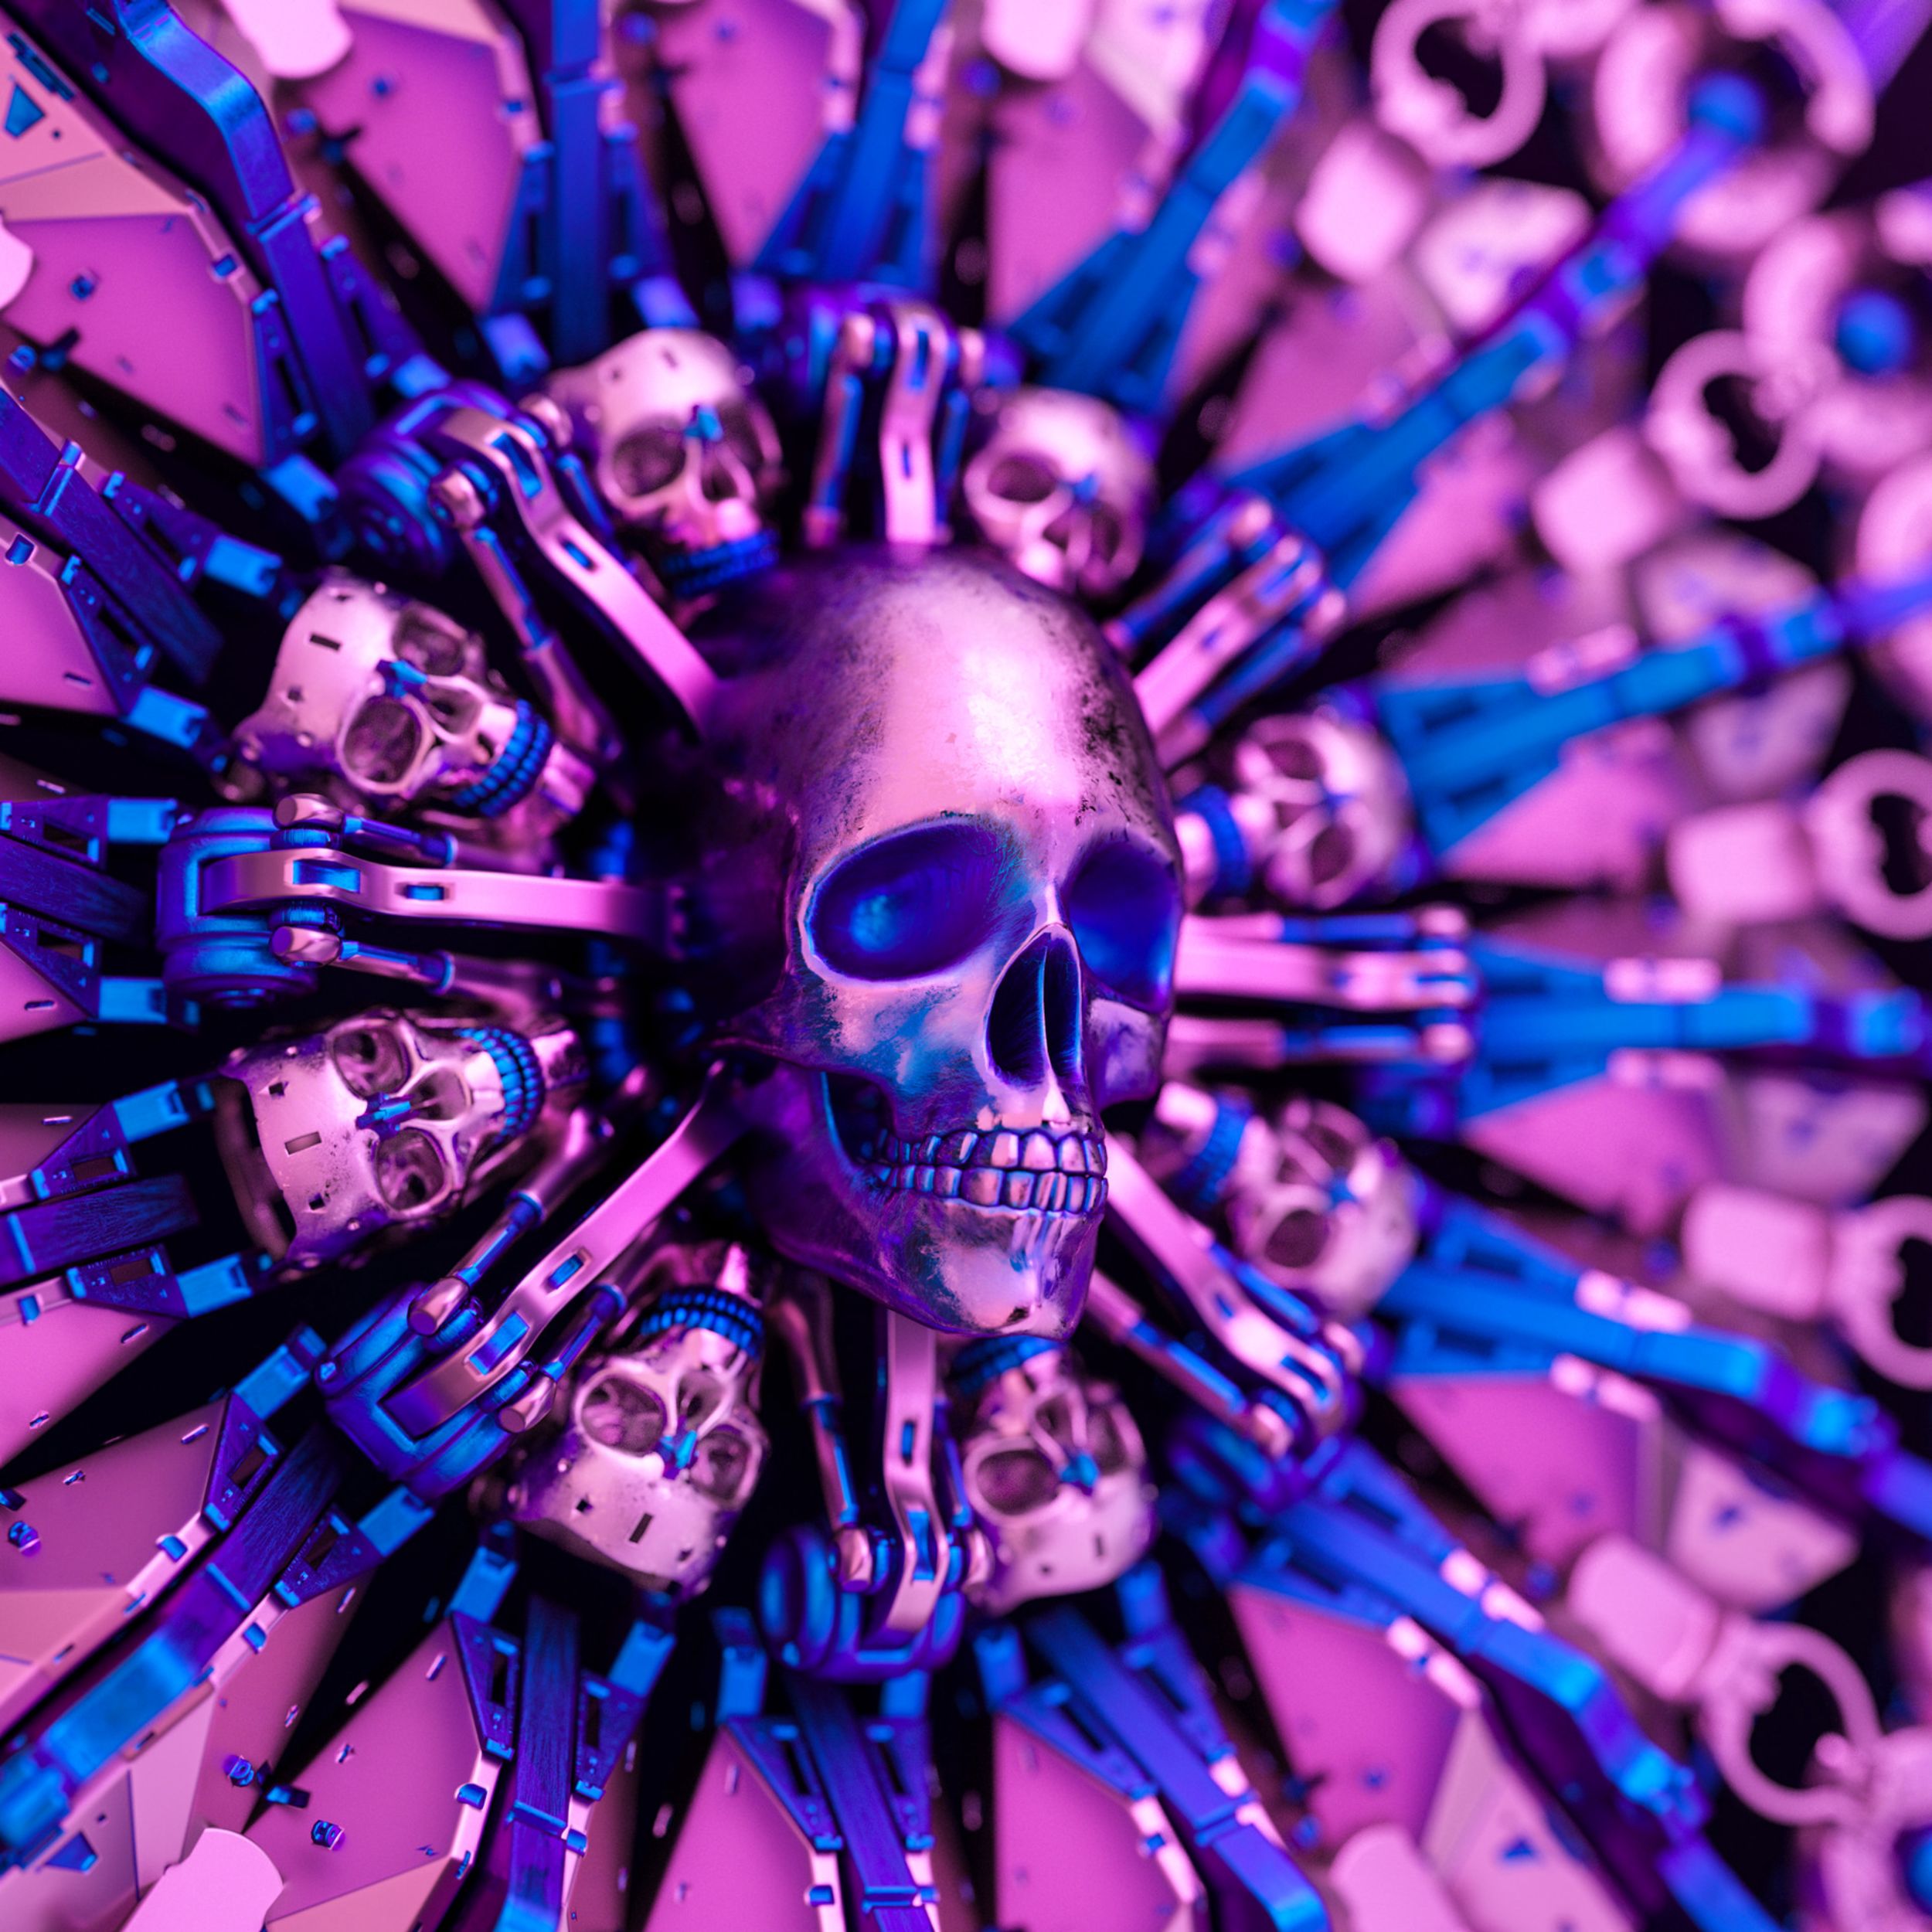 117114 download wallpaper skull, shine, miscellanea, miscellaneous, brilliance, form, metal screensavers and pictures for free